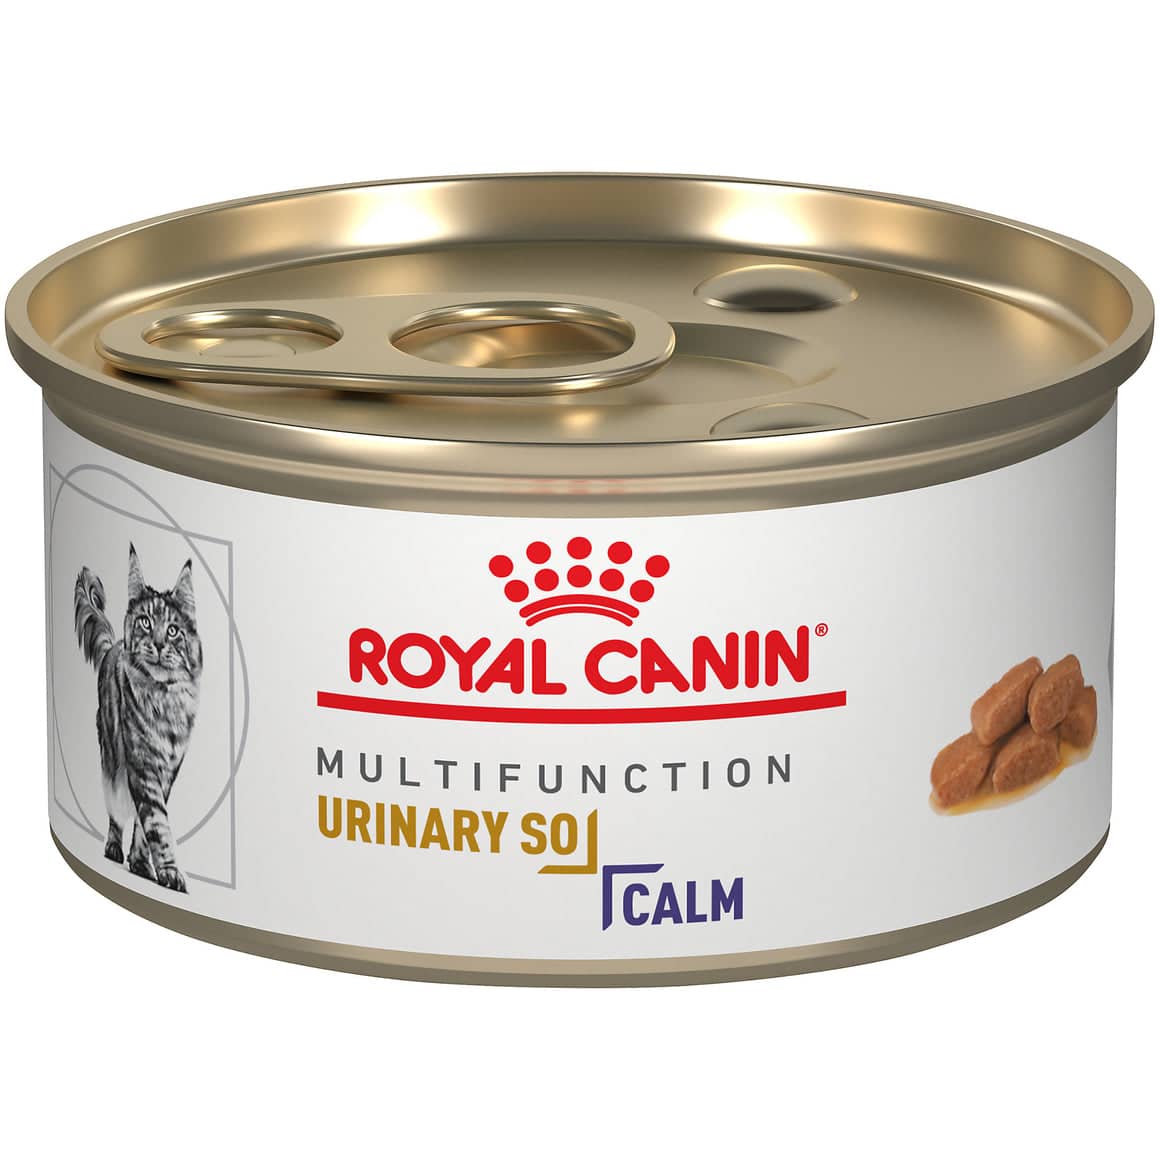 Royal Canin Veterinary Diet Urinary SO + Calm Thin Slices in Gravy Can ...